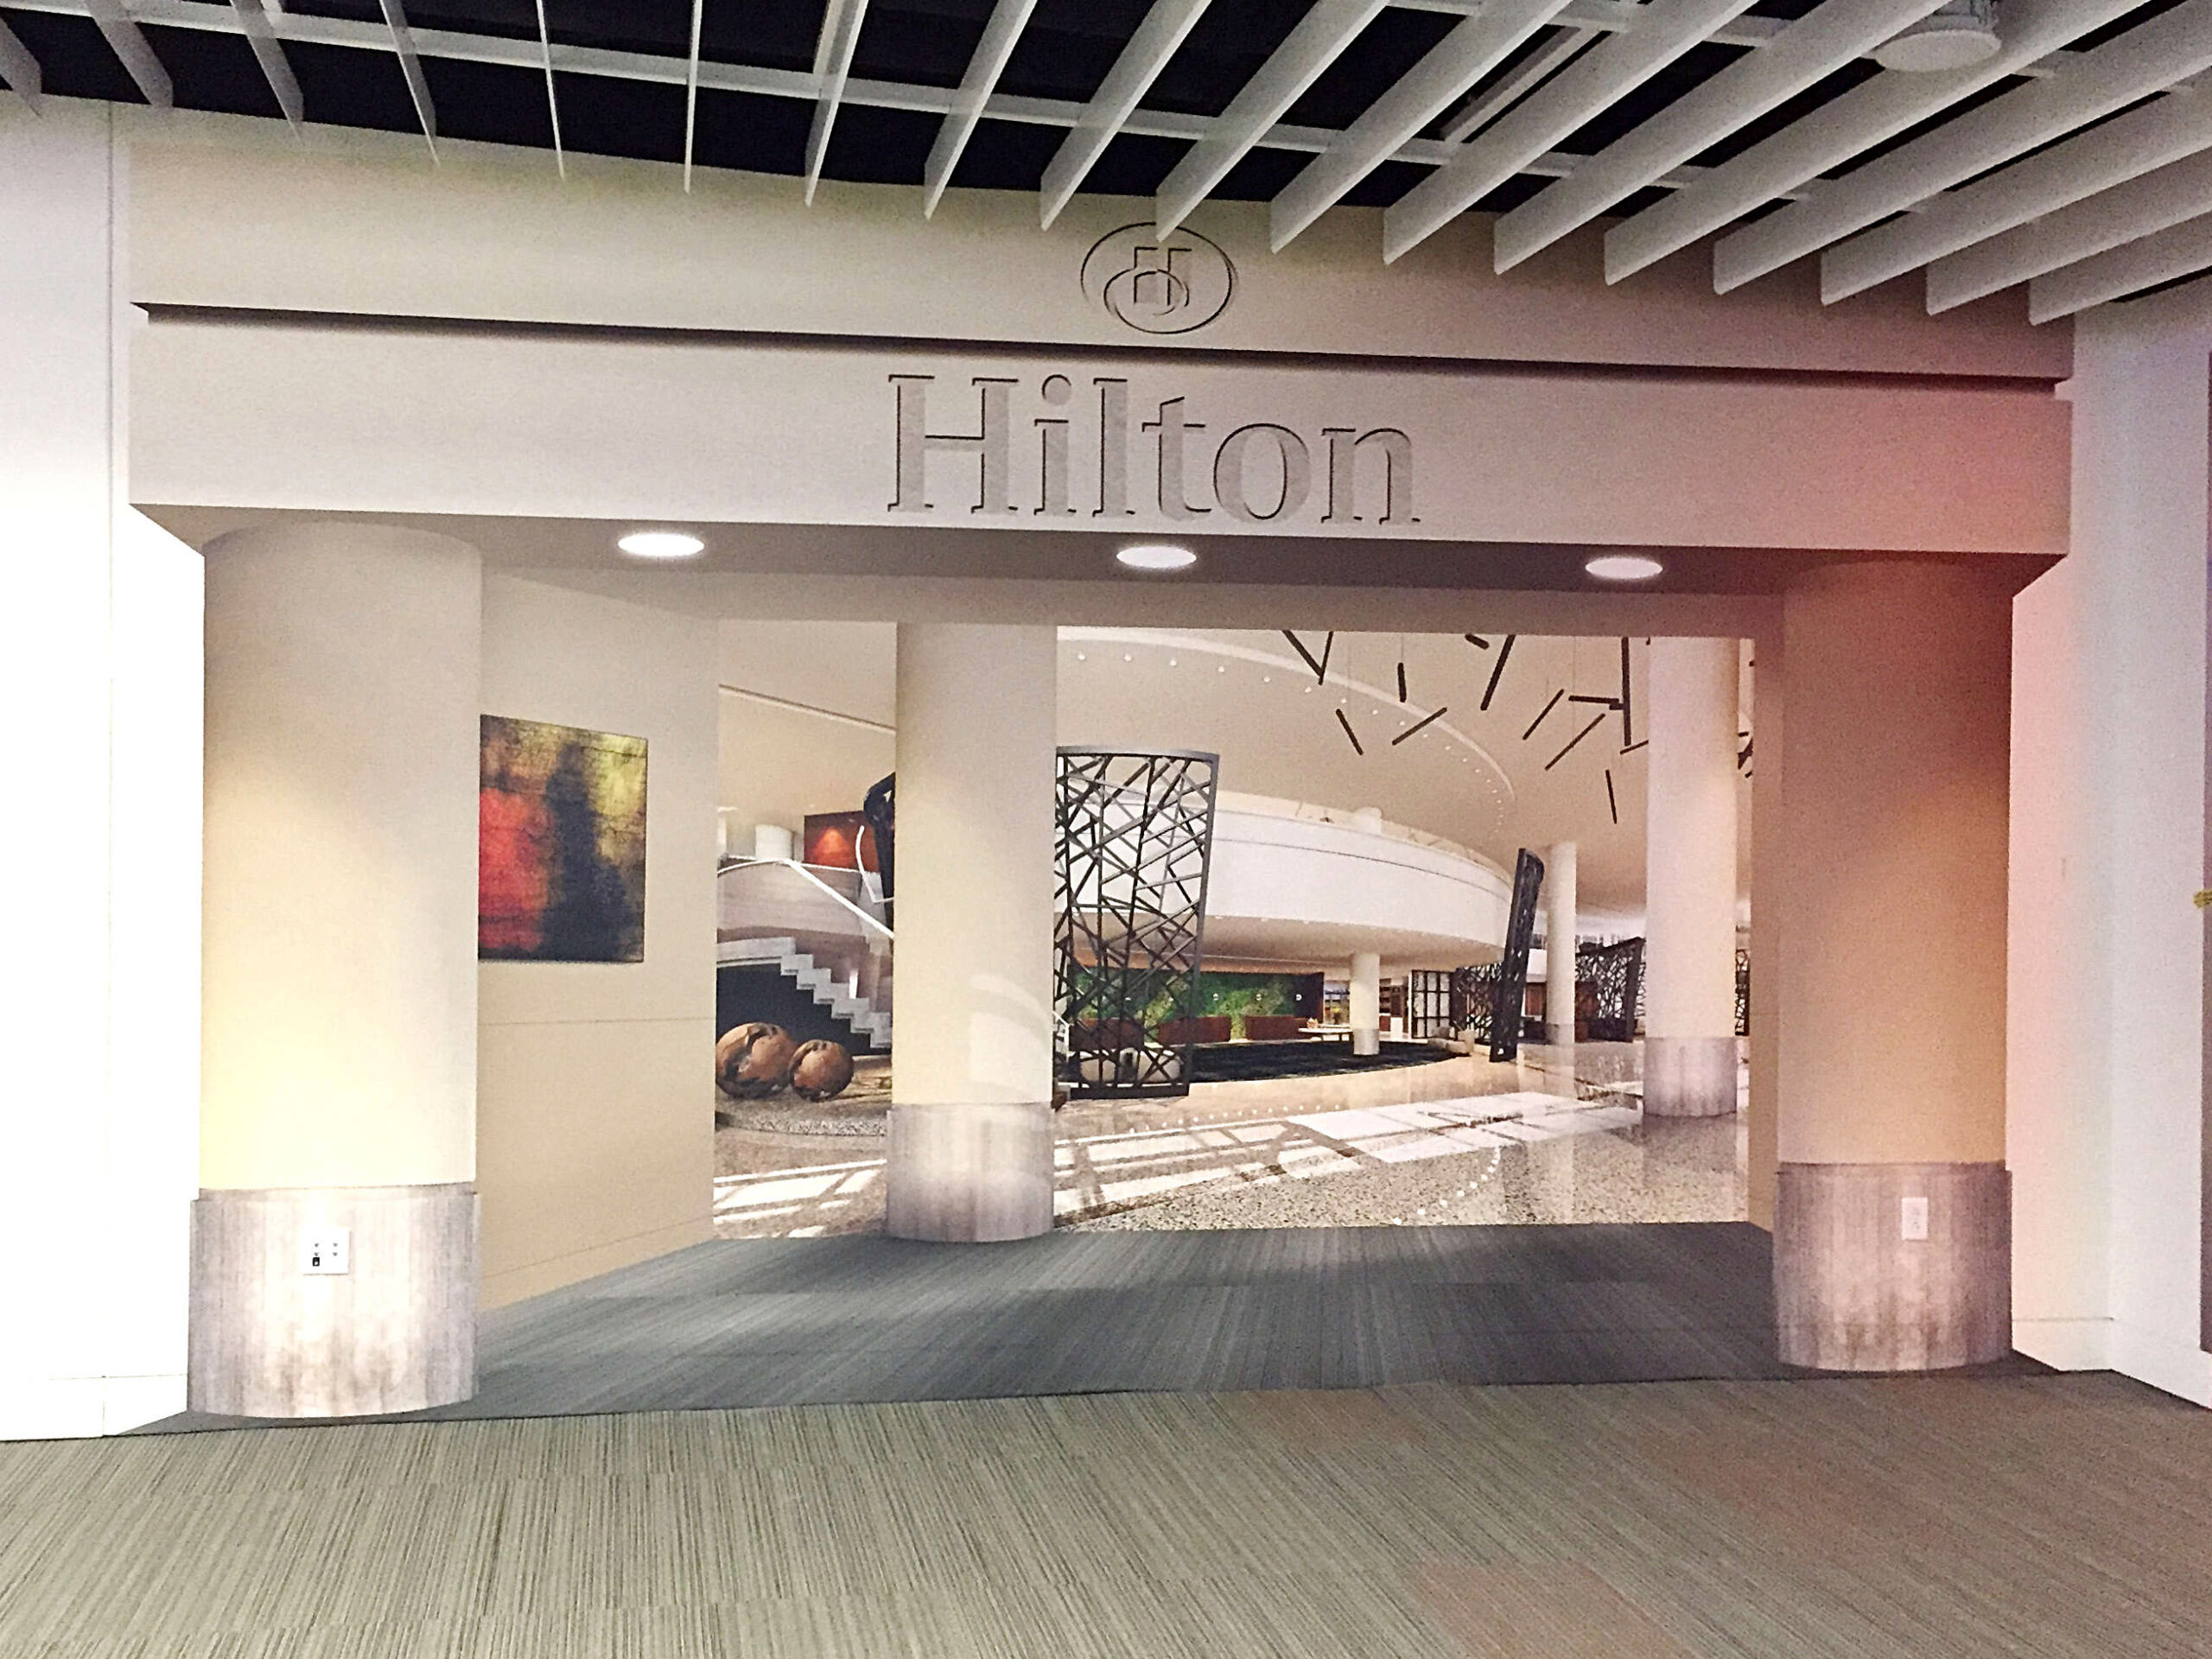 Wall Decal and signage installed in the Hilton Hotel entrance